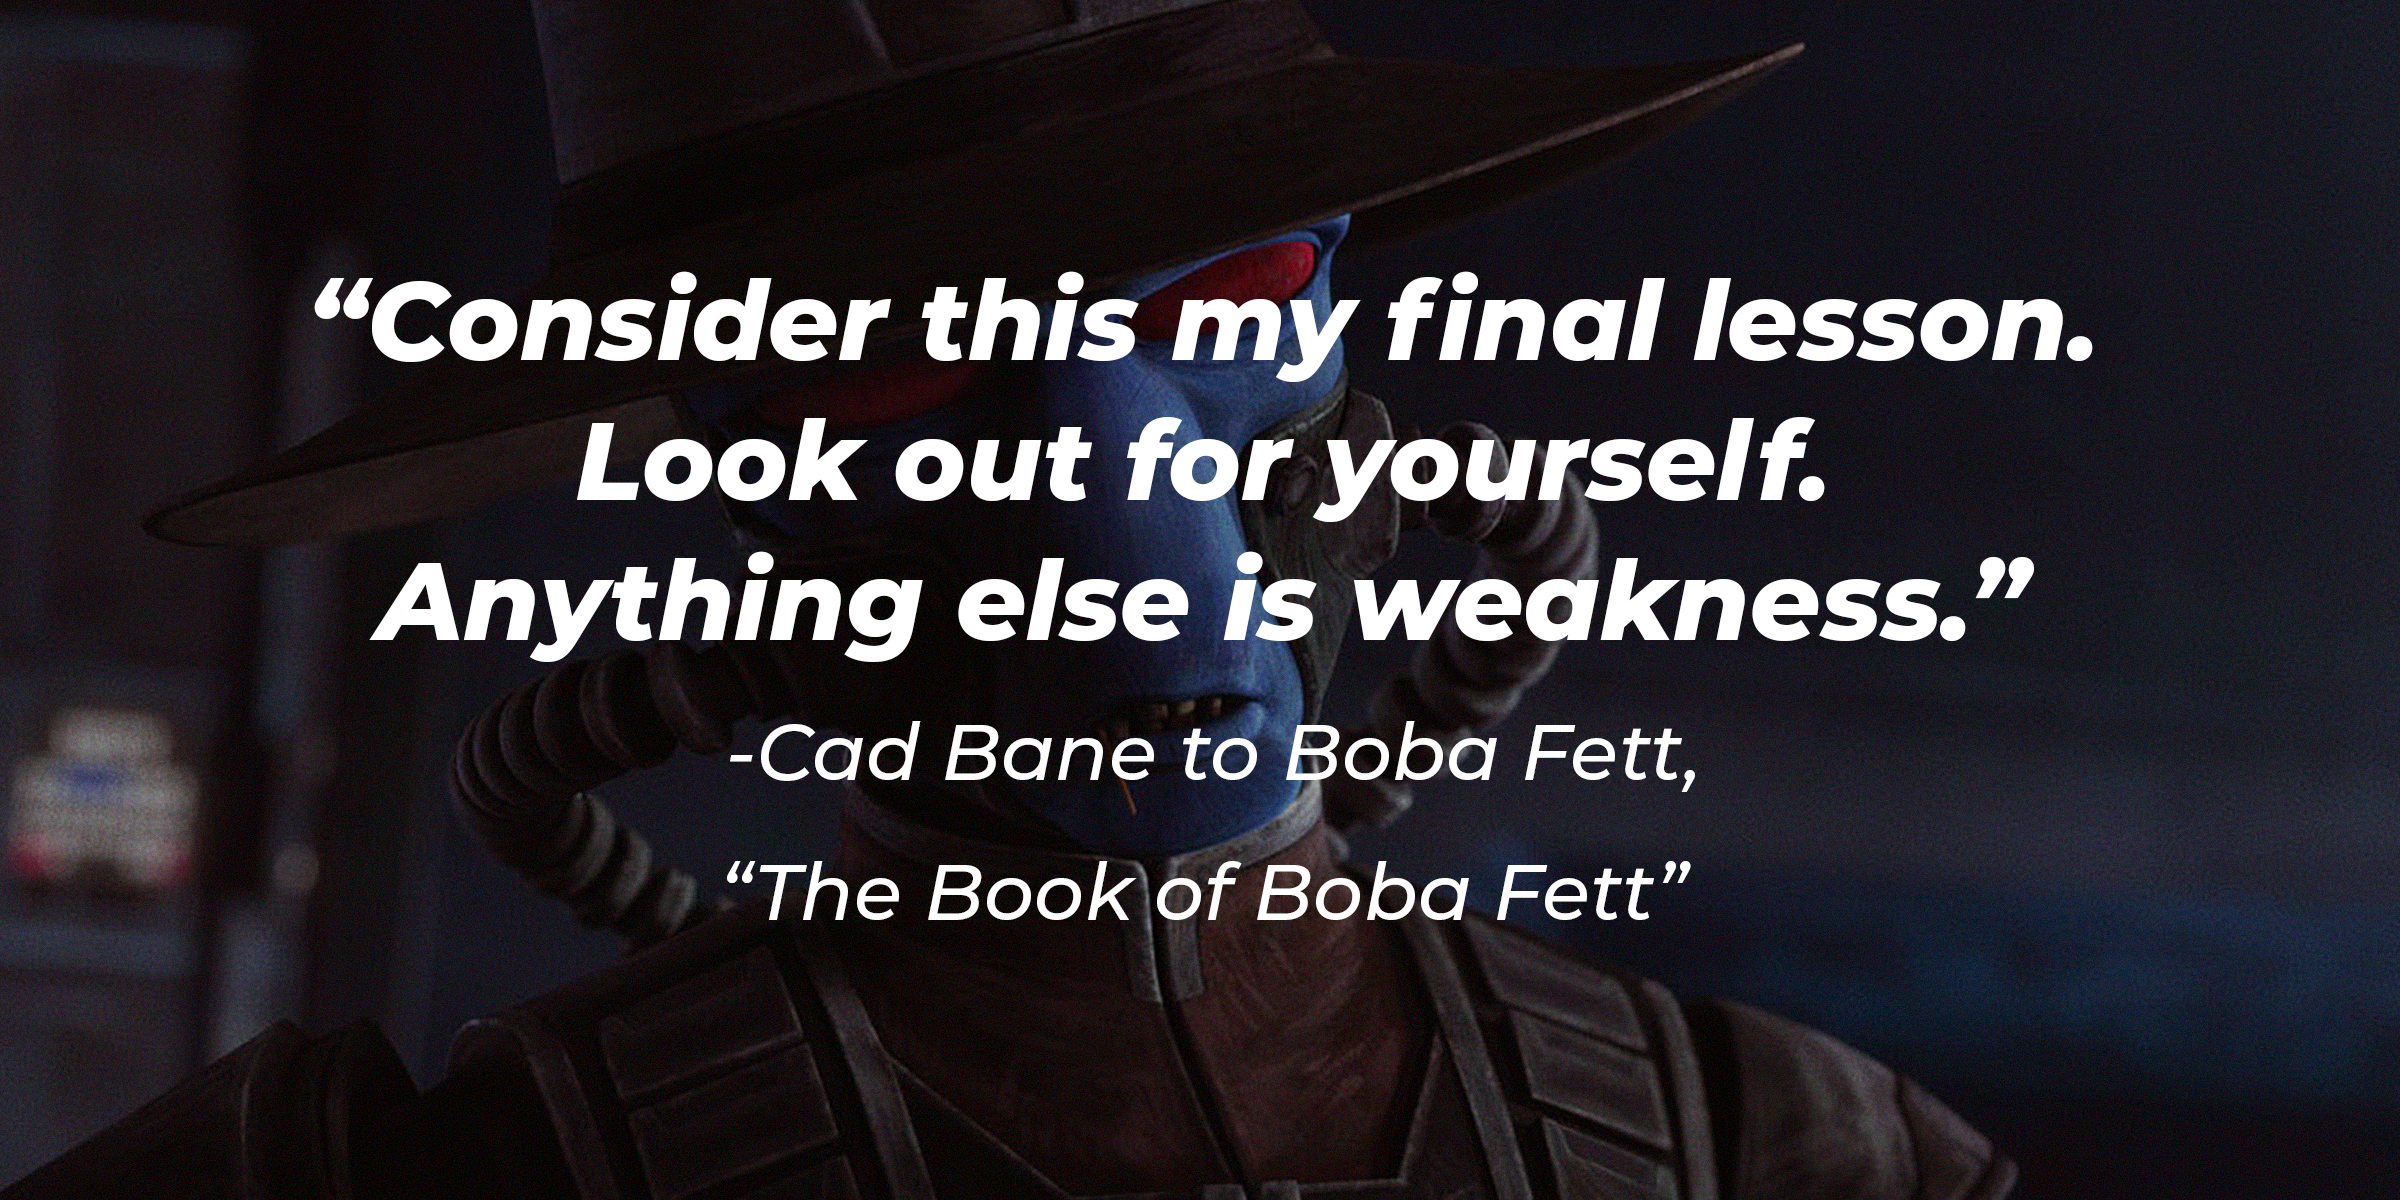 Cad Bane quote: "Consider this my final lesson. Look out for yourself. Anything else is weakness. " | Source: facebook.com/StarWars